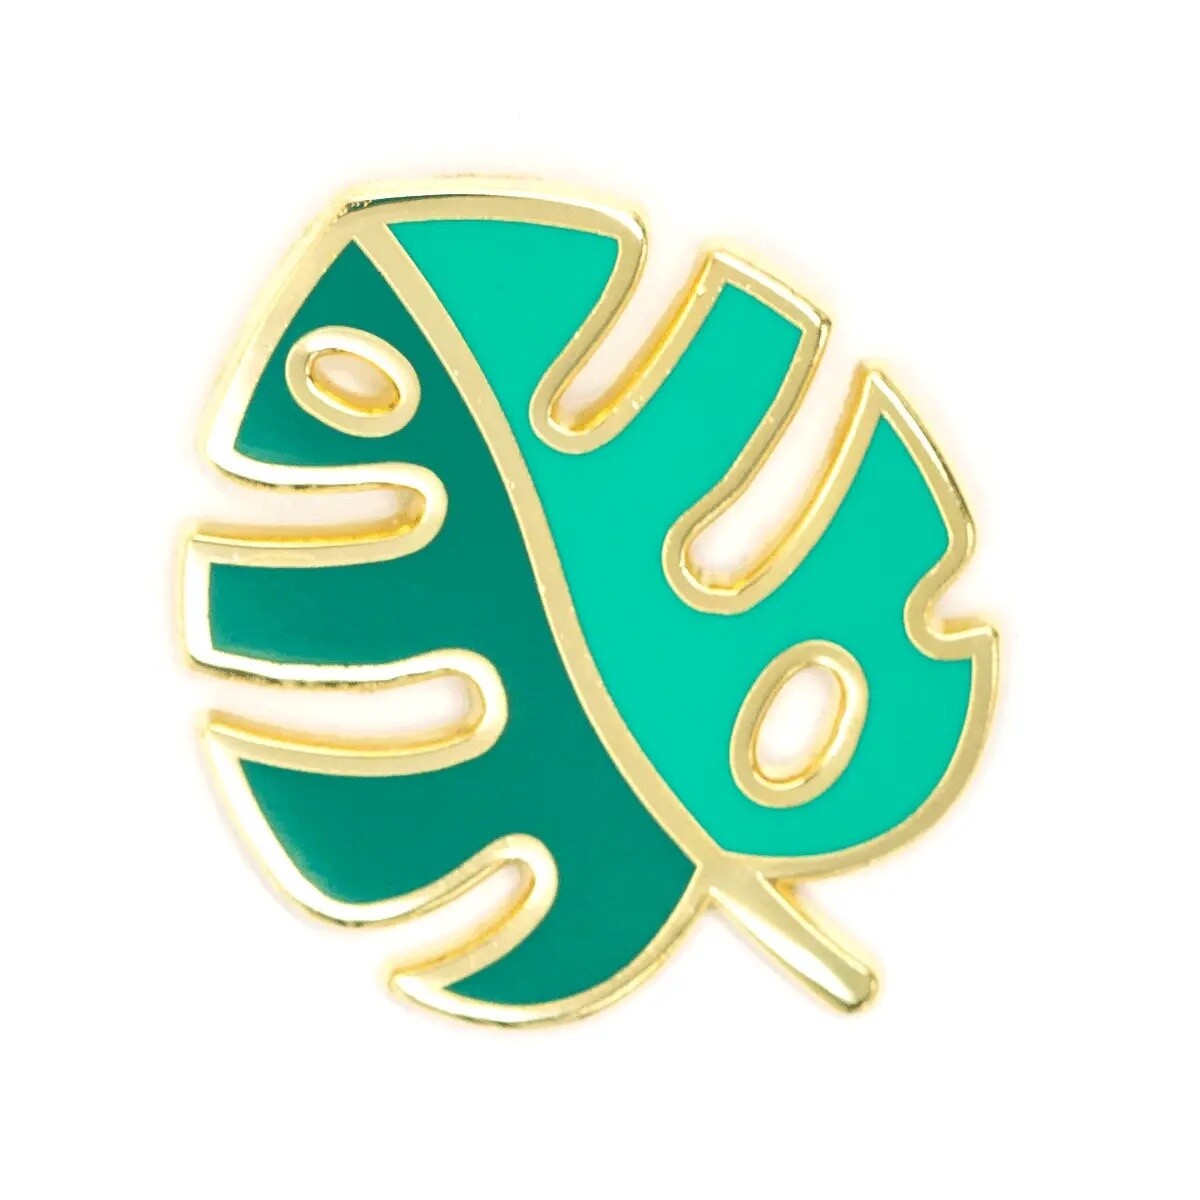 Monstera Leaf - Enamel Pin by These Are Things